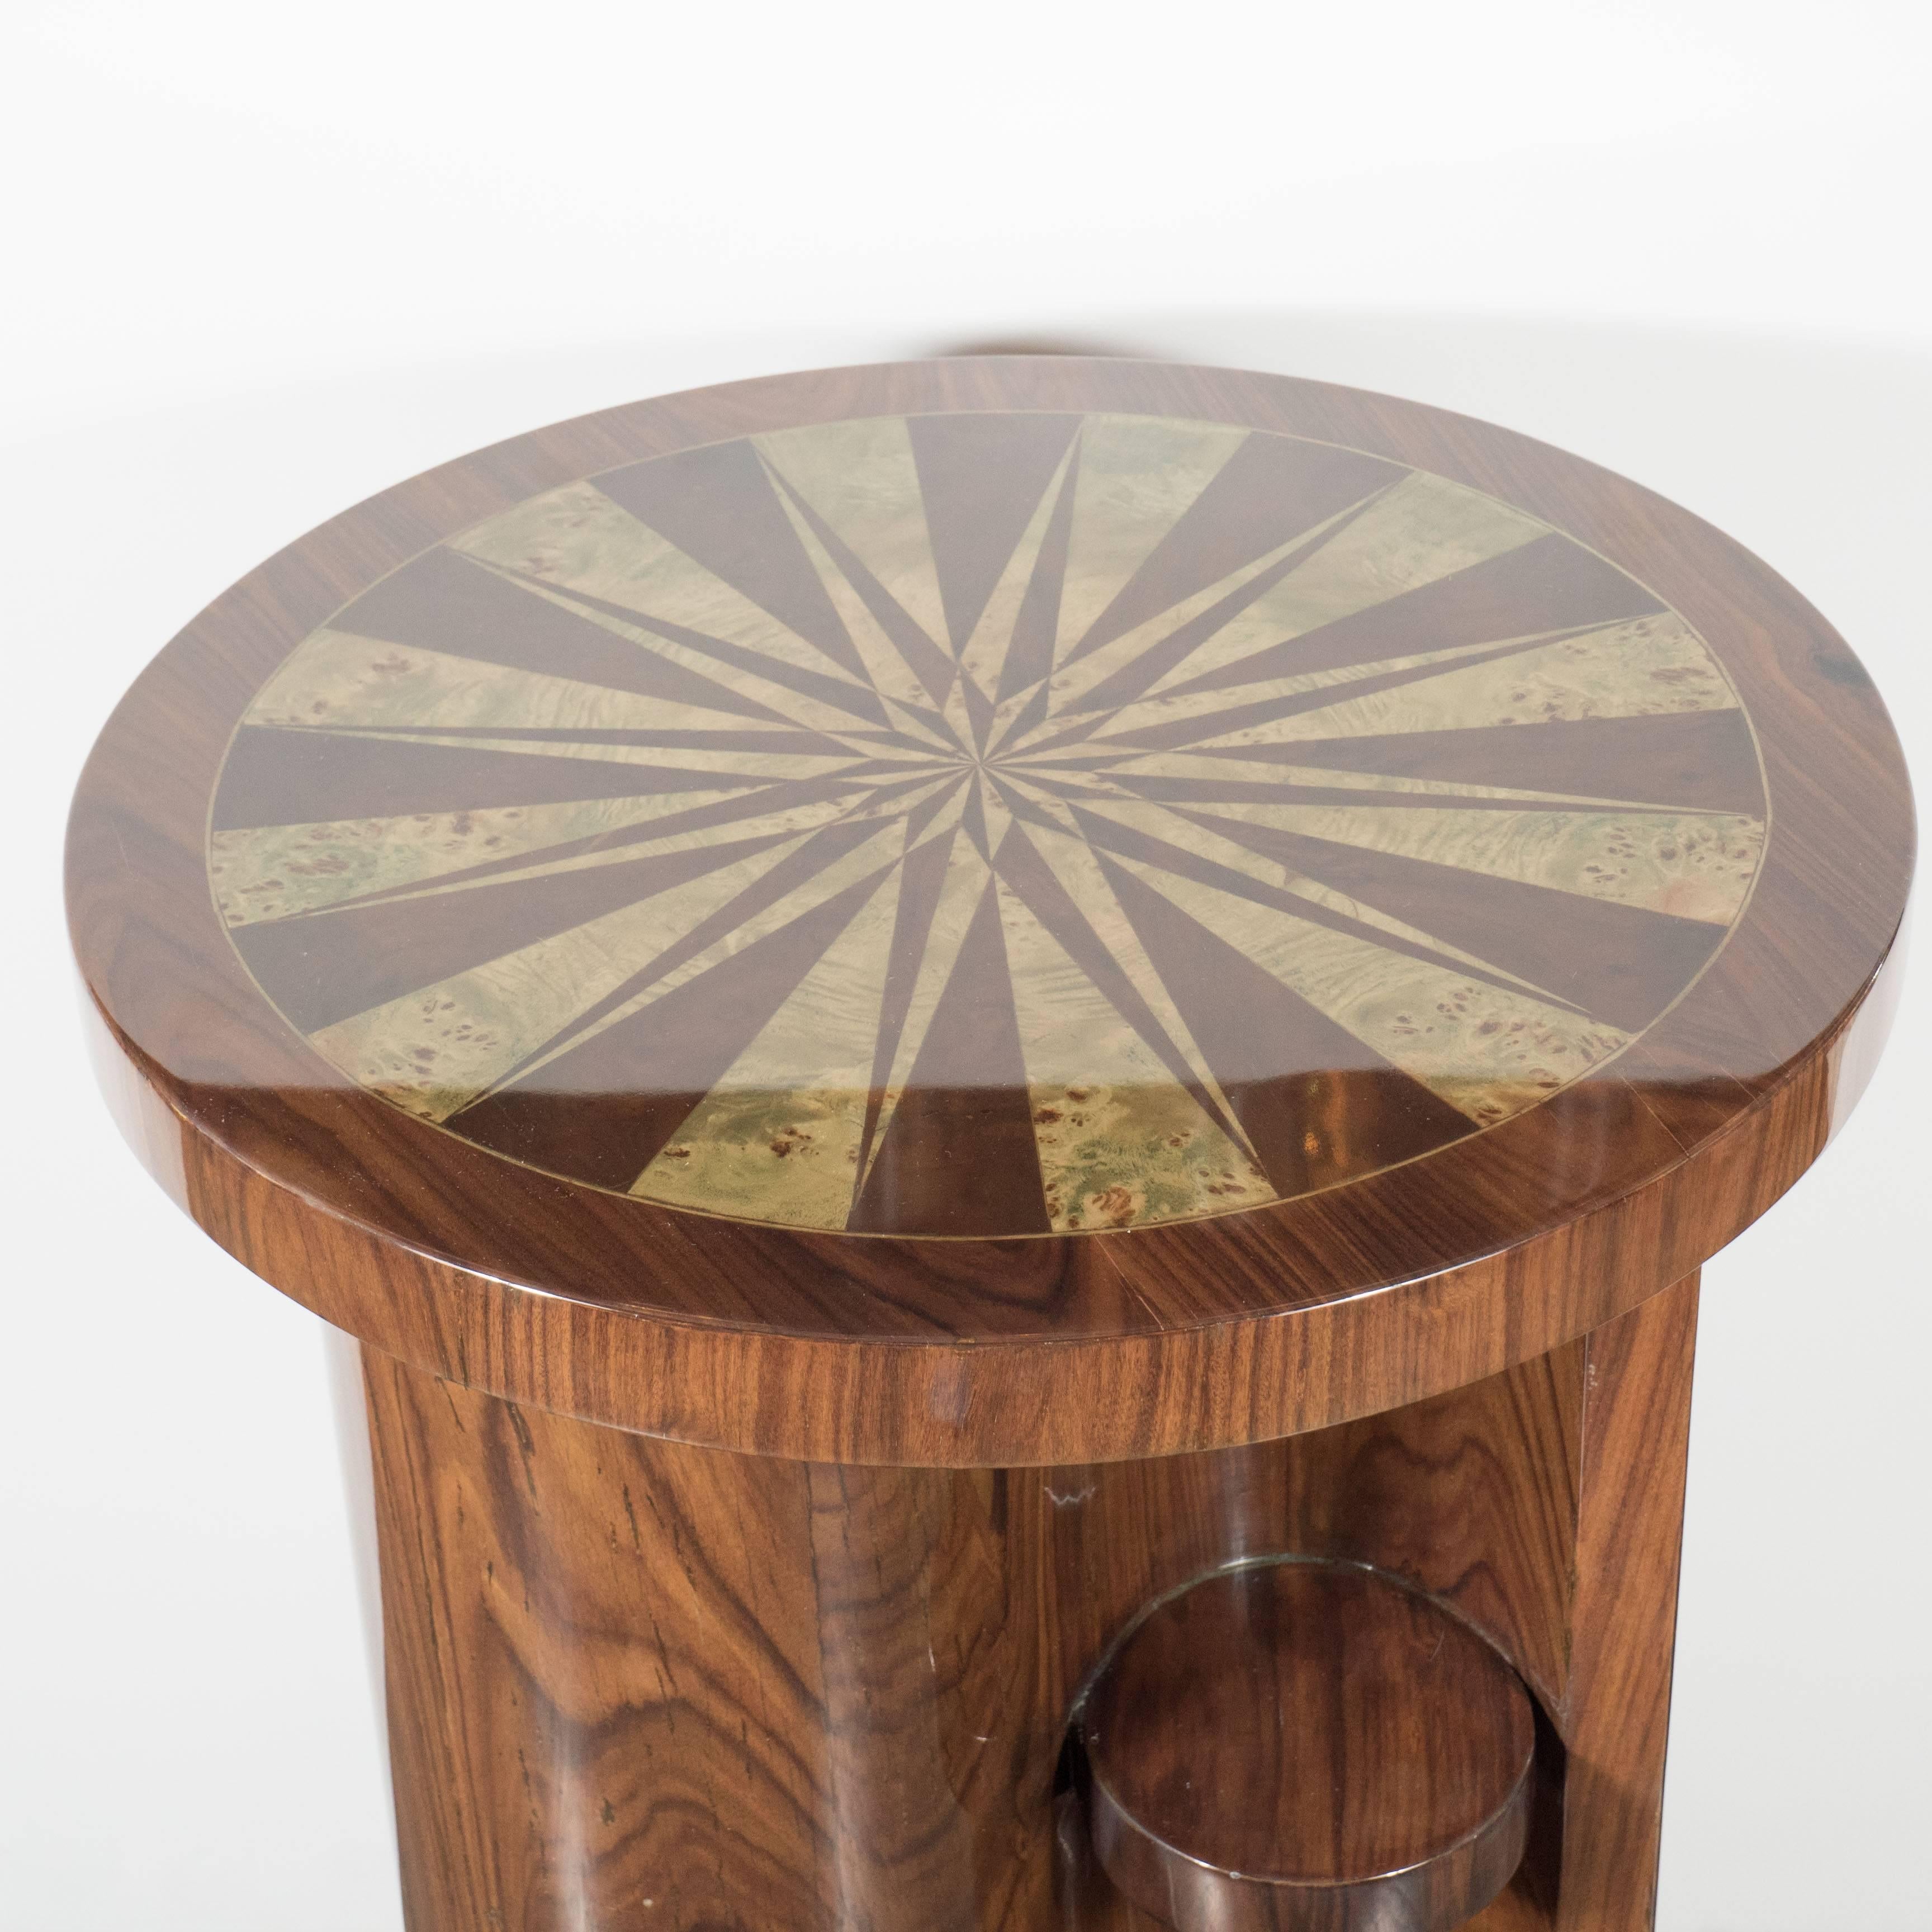 Art Deco Inlaid Starburst Table/ Pedestal in Bookmatched Burled Walnut & Elm For Sale 1